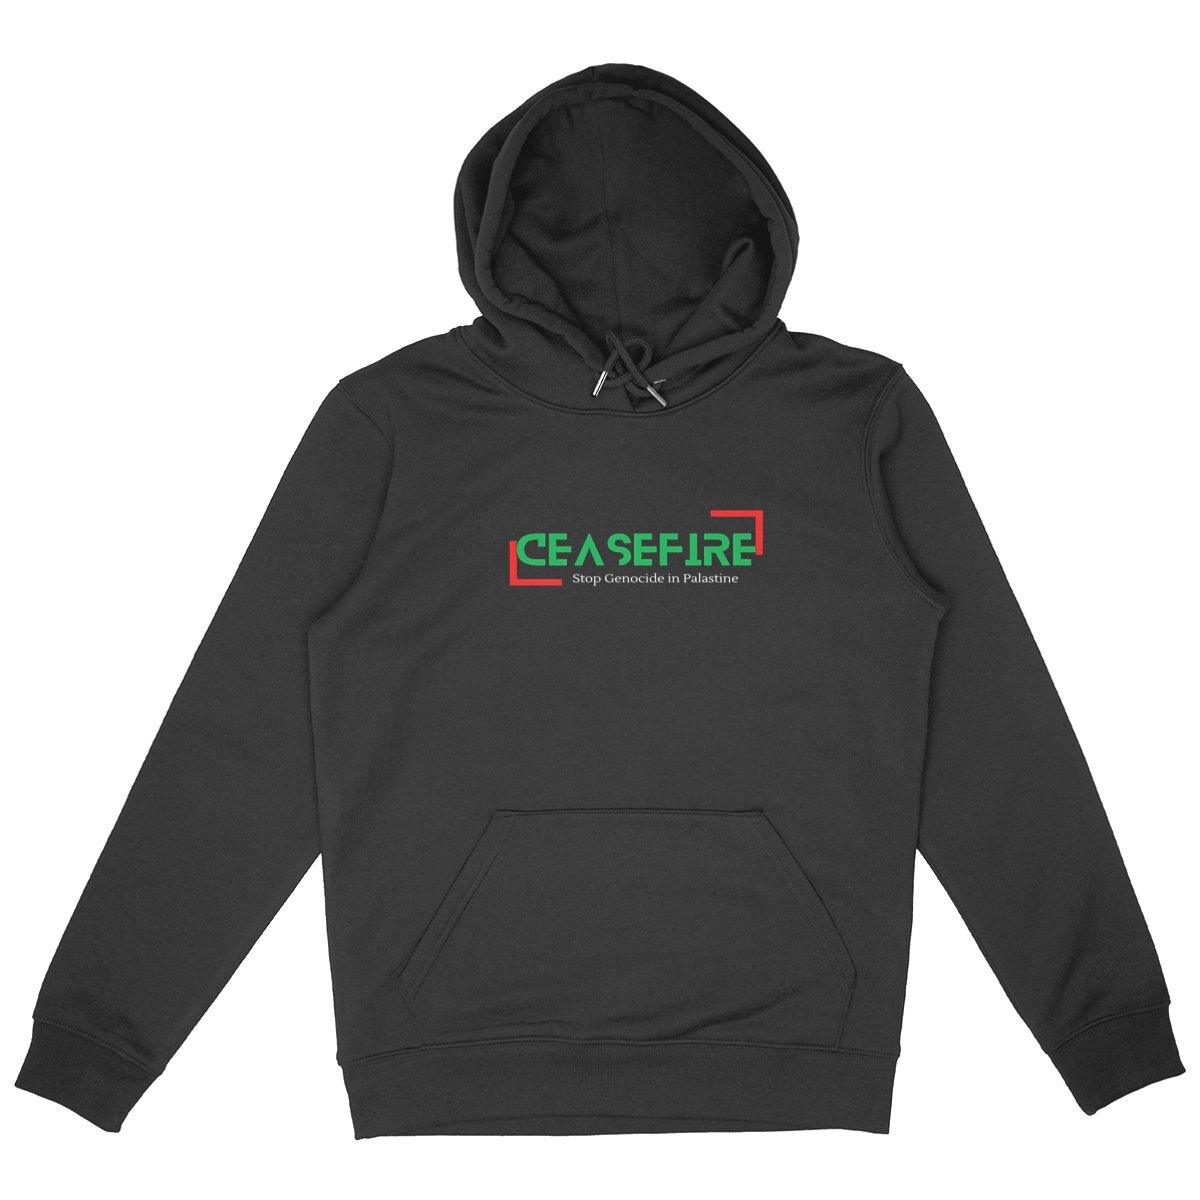 Ceasefire Palestine unisex premium hoodie, heavyweight medium fit, designed by Tree of Life Art, promotes peace in a sustainable fashion.